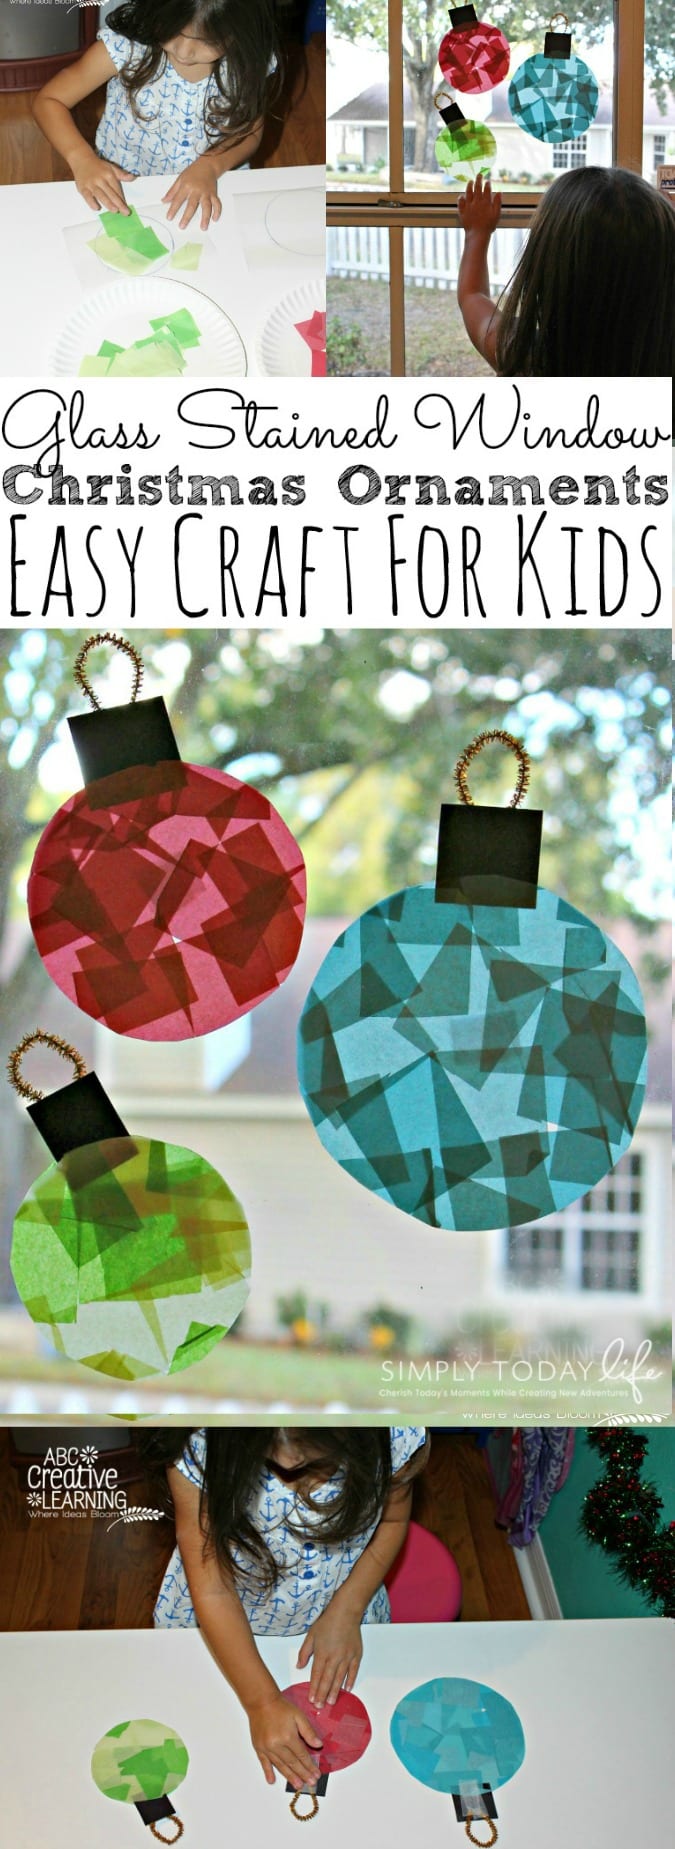 Glass Stained Window Ornaments Kids Craft - simplytodaylife.com